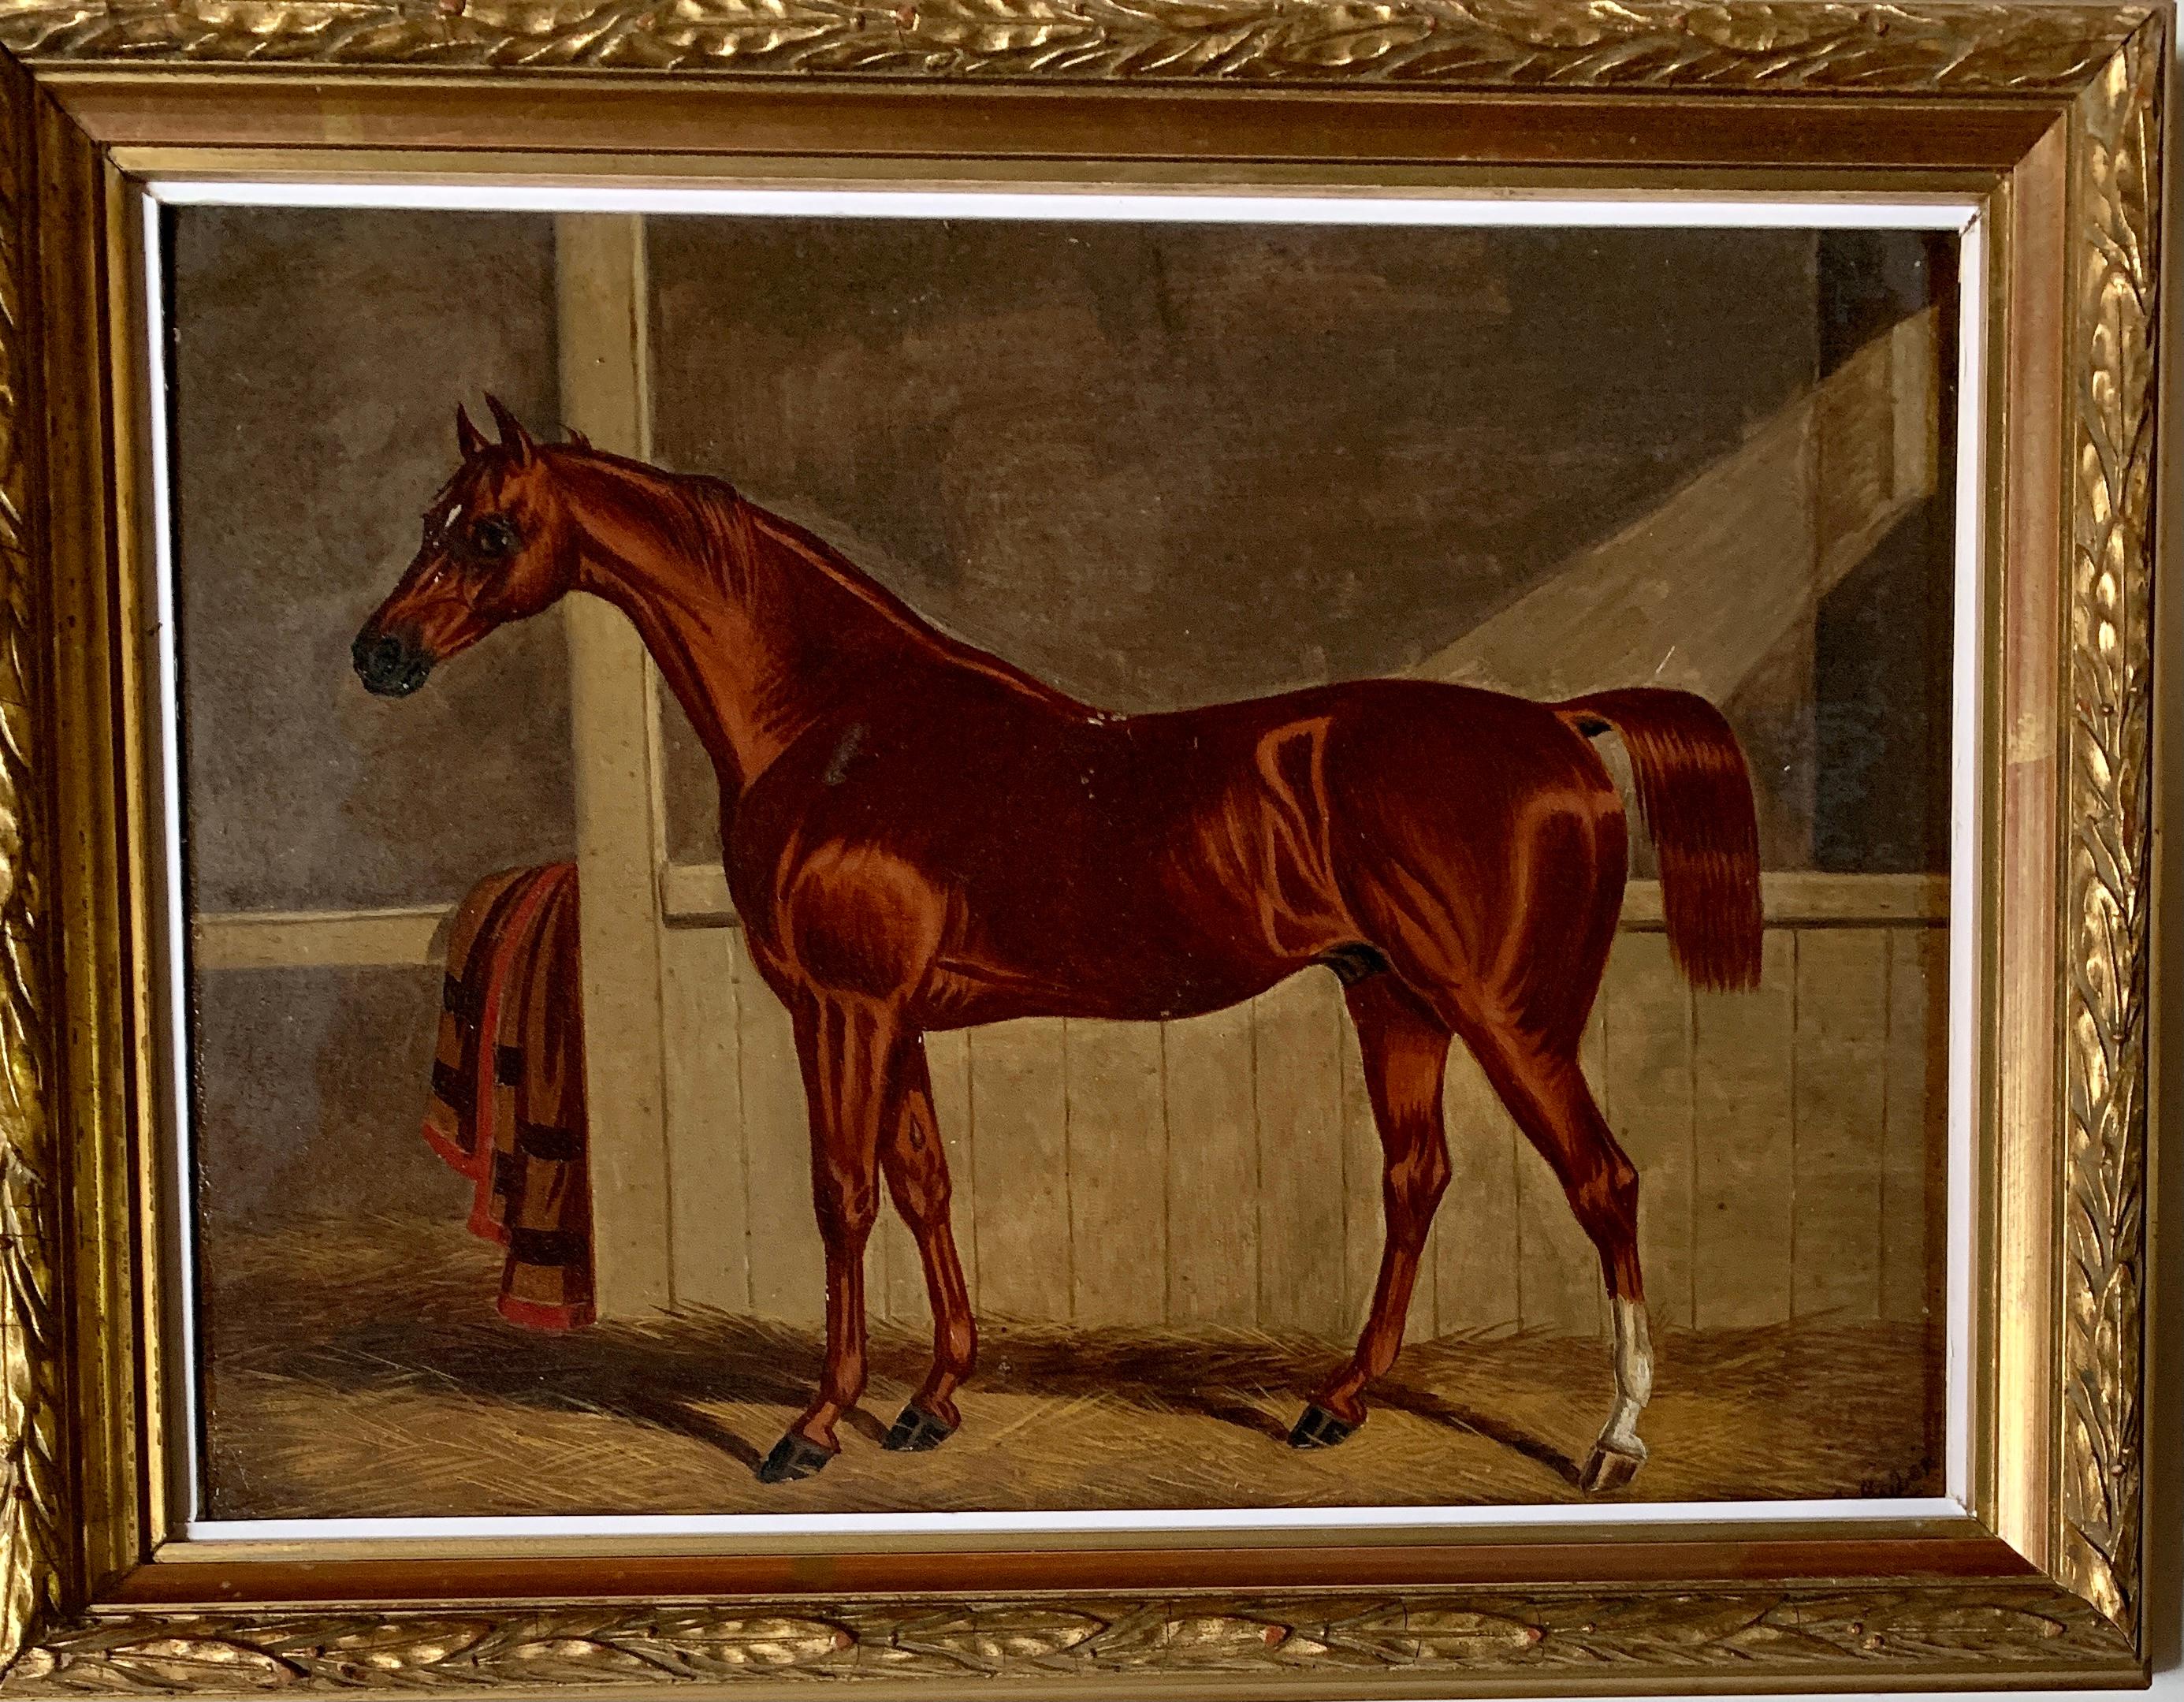 Edwin Loder Animal Painting - 19th century English Antique Portrait of an Chestnut Horse in a stable in oils